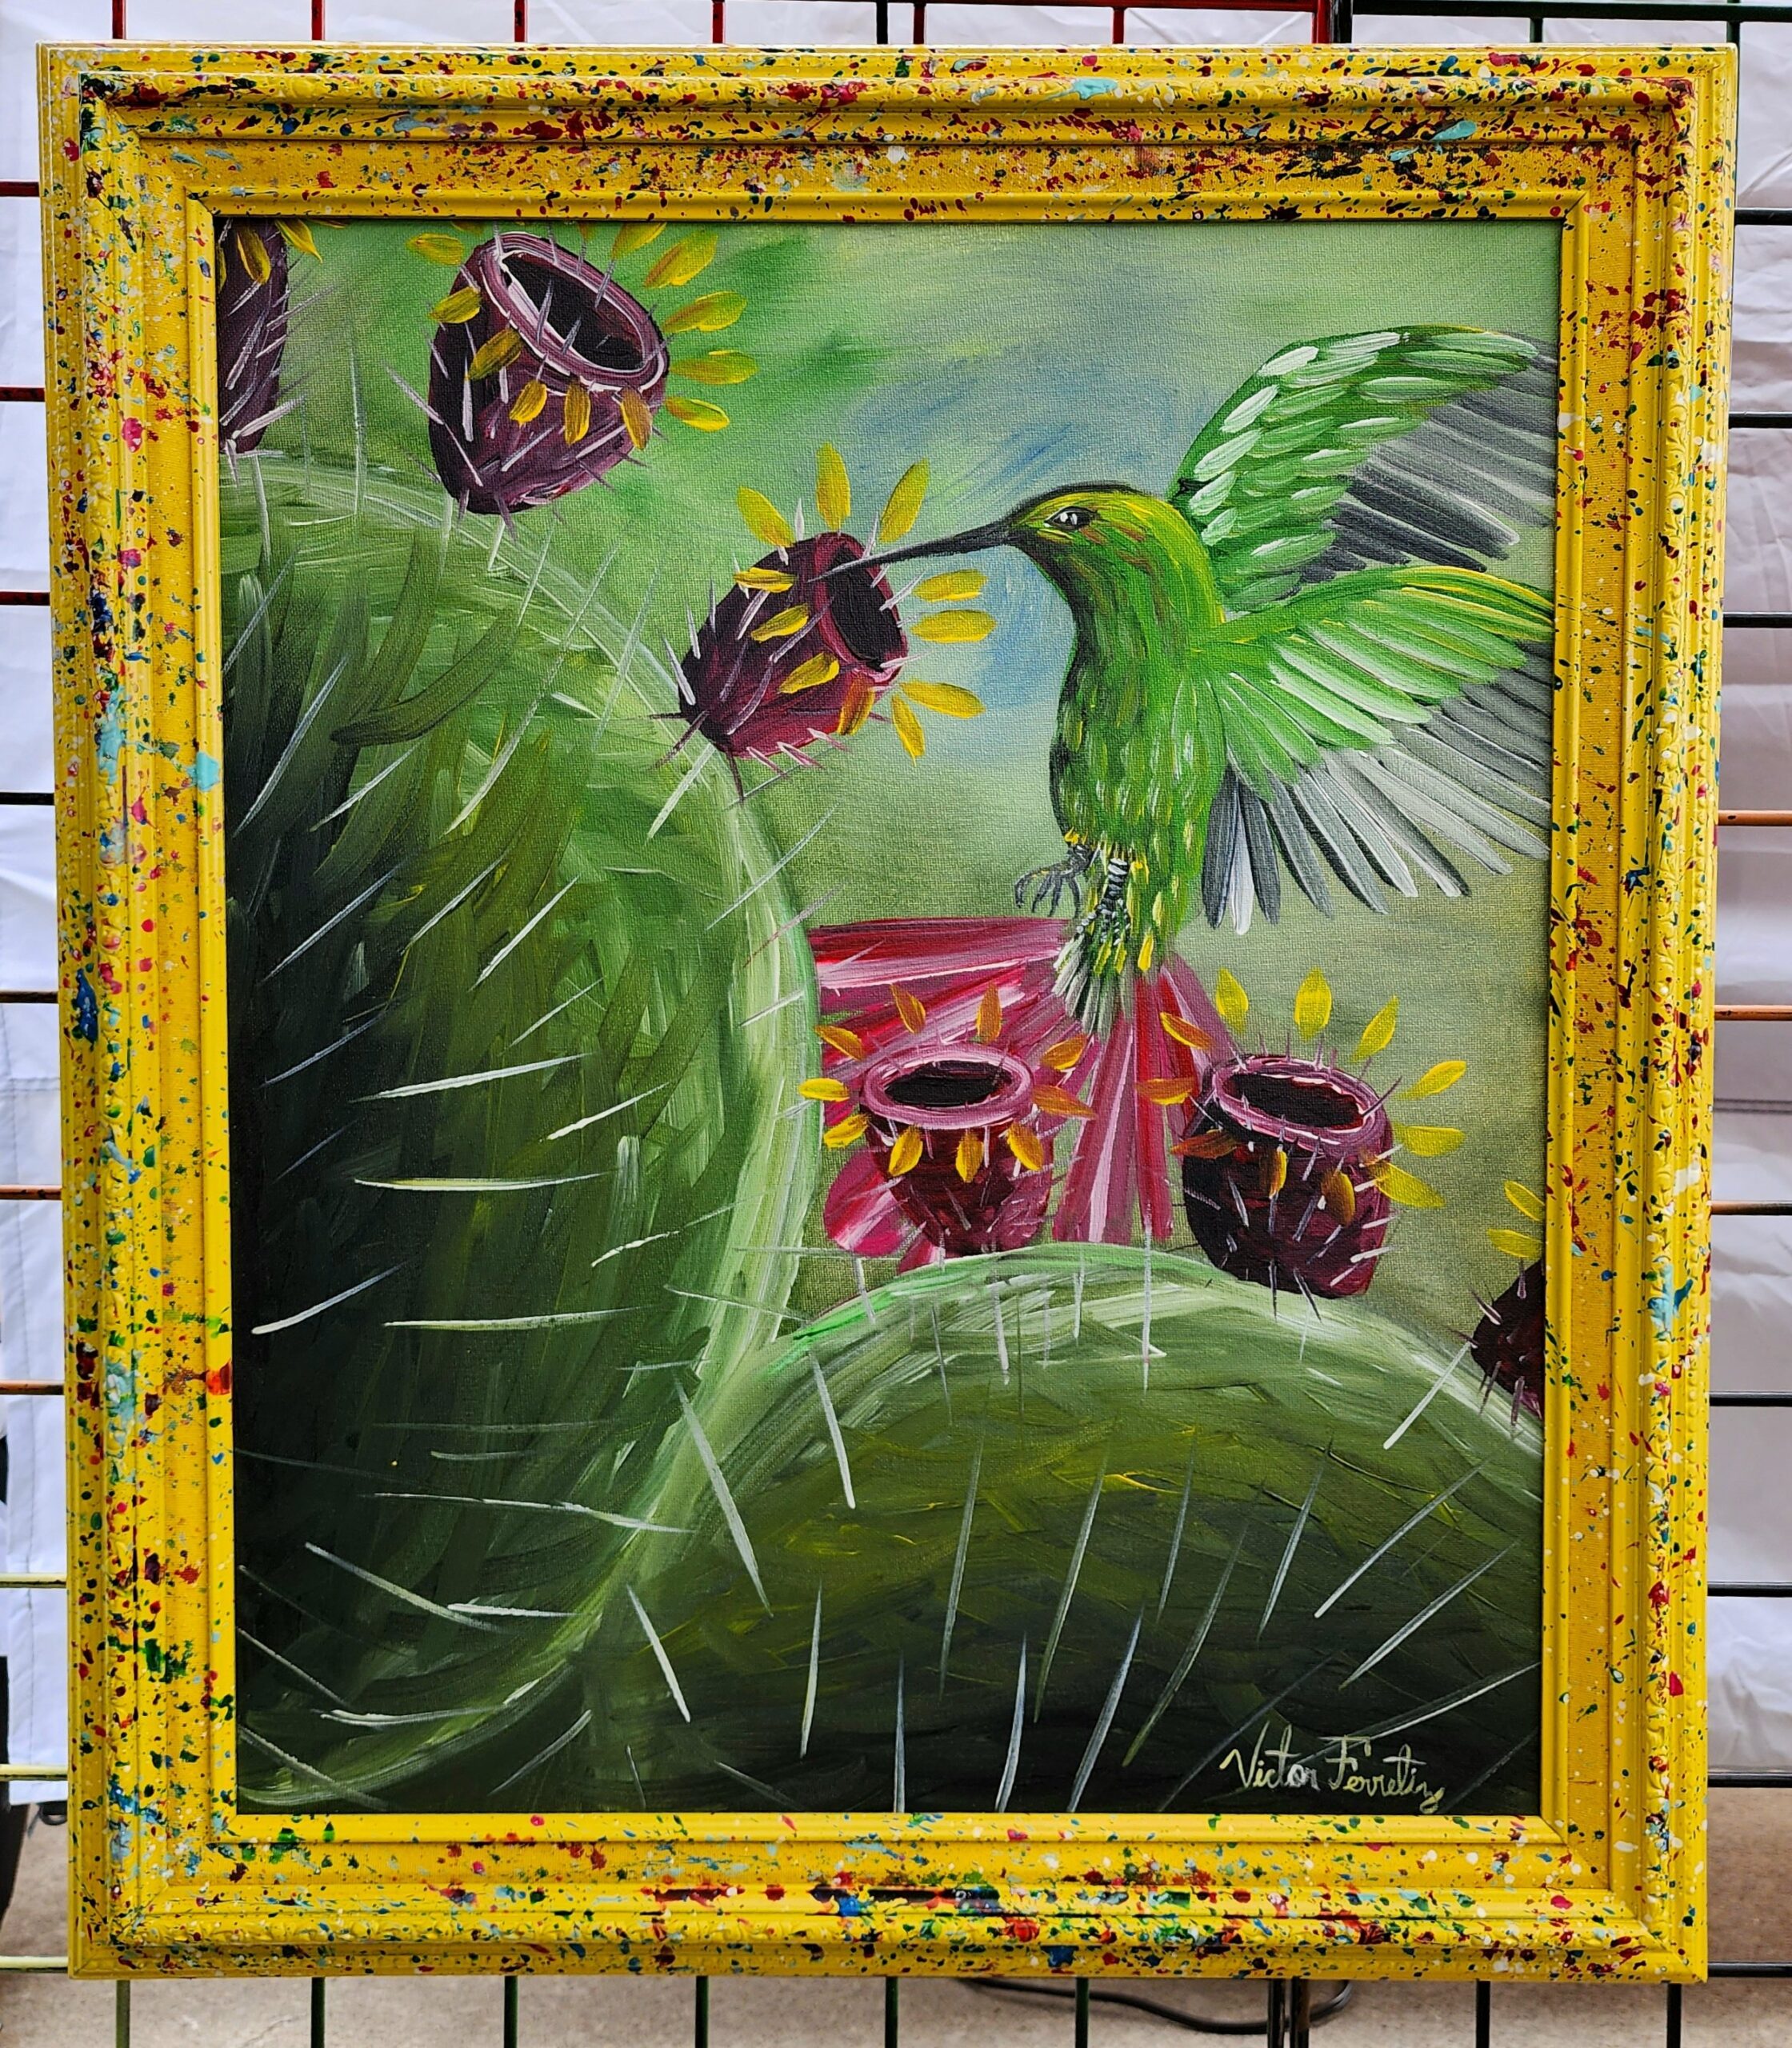 This is a painting of a hummingbird flying over some beautiful cacti with juicy prickly pears. The painting is already framed and ready to hang on your beautiful and warming home. Abstract style.